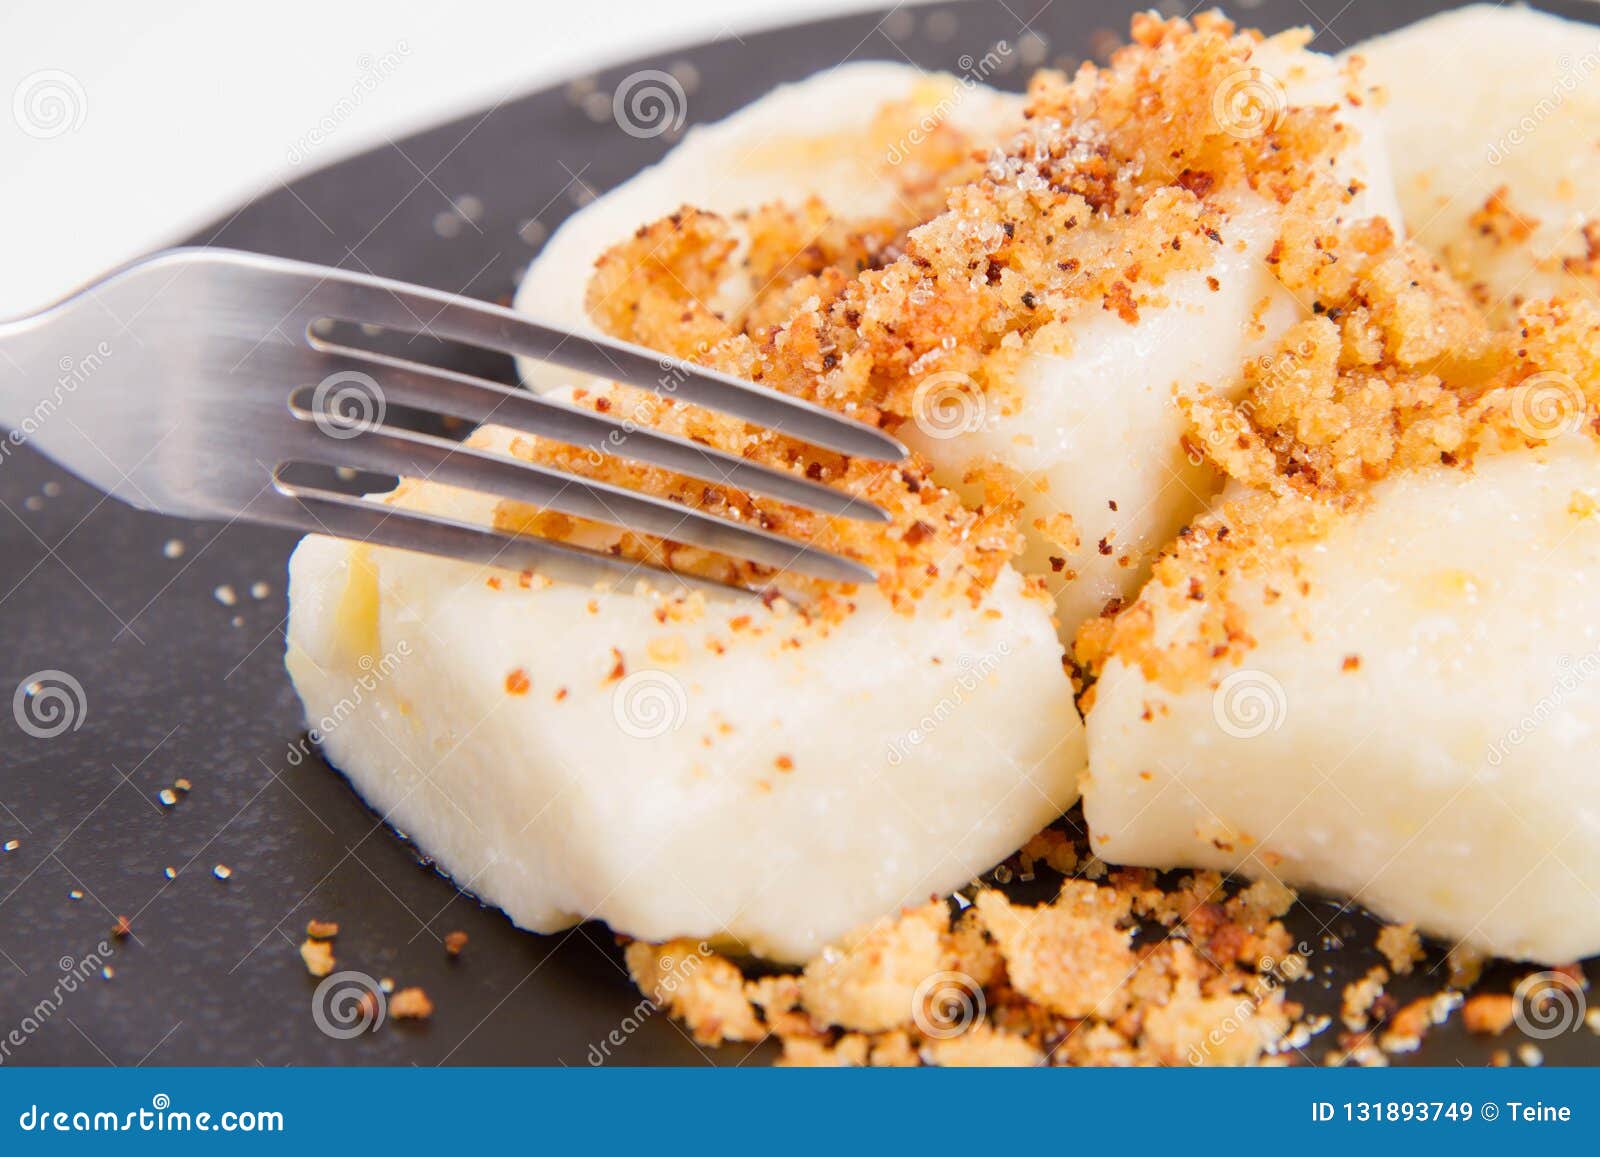 Dumplings With Cottage Cheese Stock Image Image Of Called